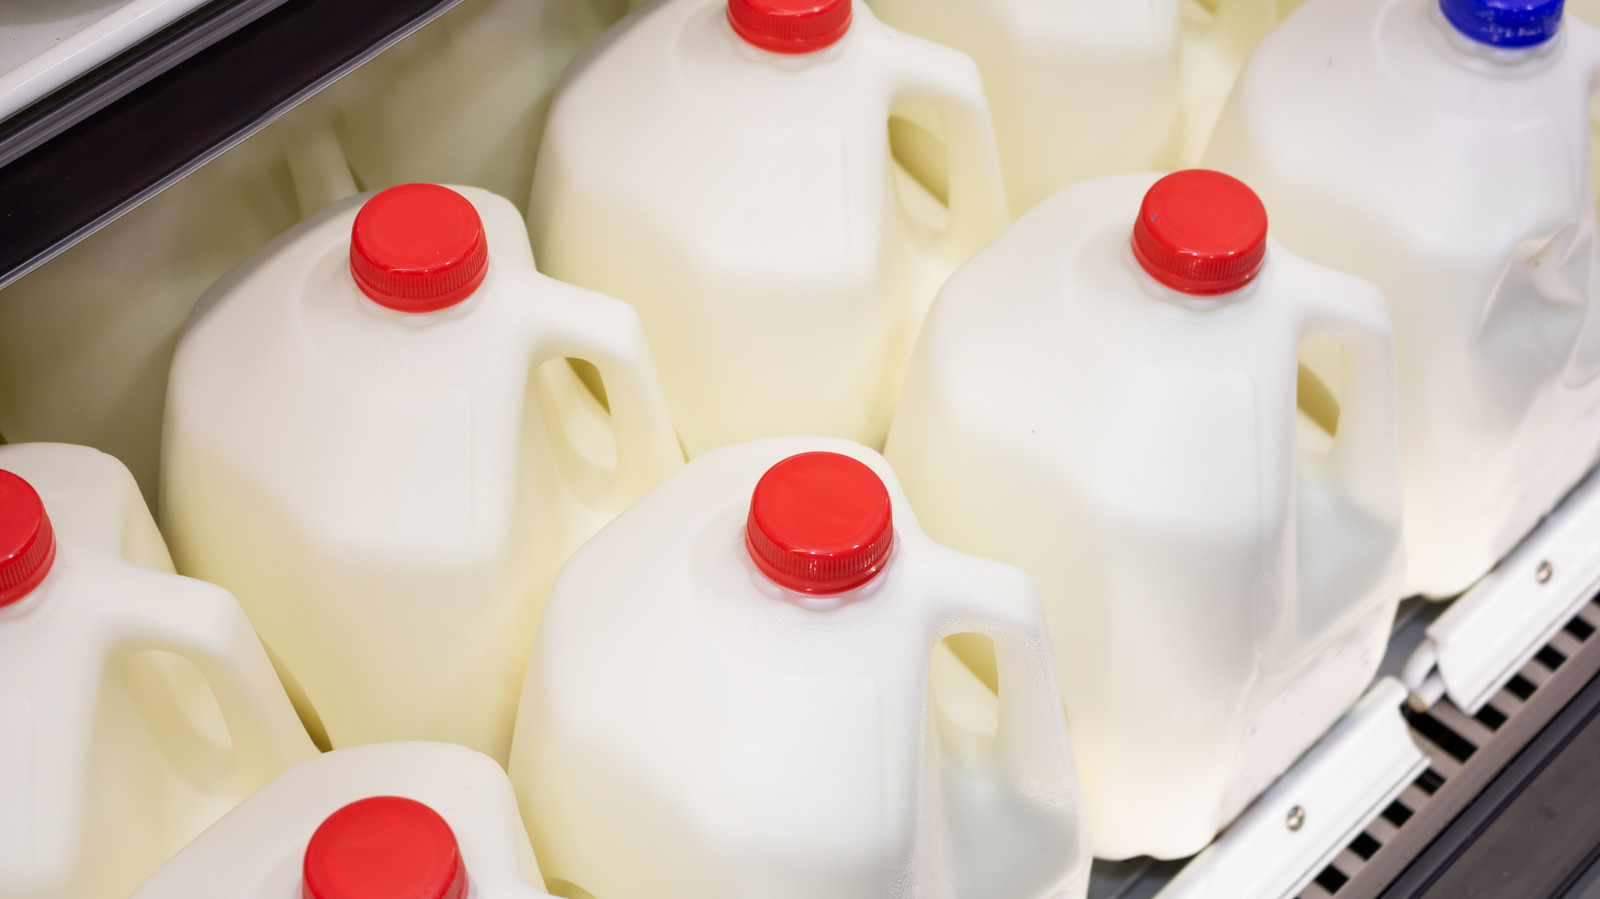 https://www.thedailymeal.com/img/gallery/do-those-indents-on-the-sides-of-gallon-milk-jugs-actually-do-anything/l-intro-1676055187.jpg